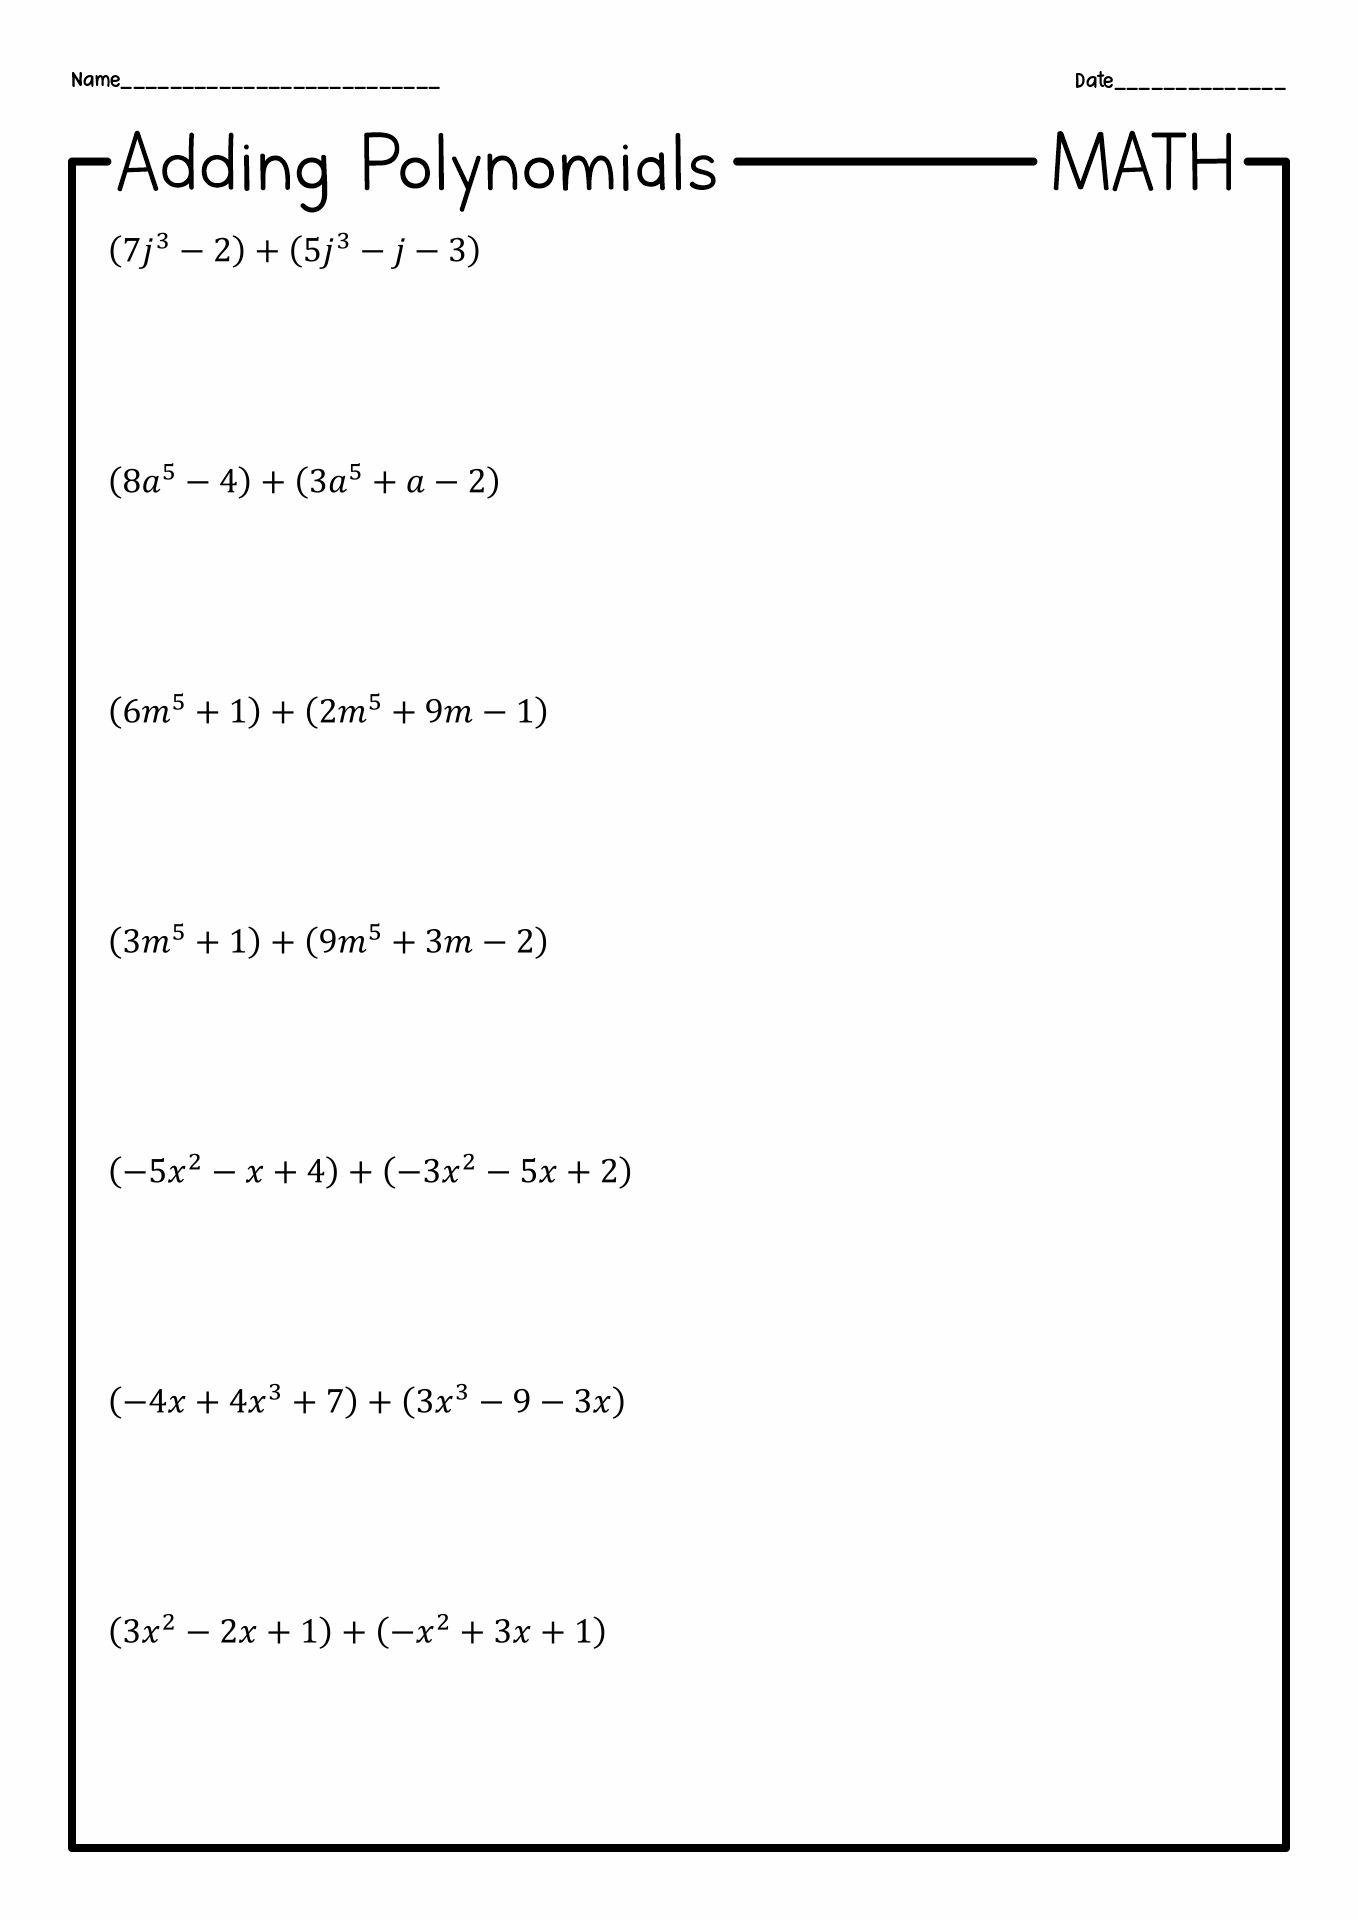 Adding Subtracting and Multiplying Polynomials Worksheet Image